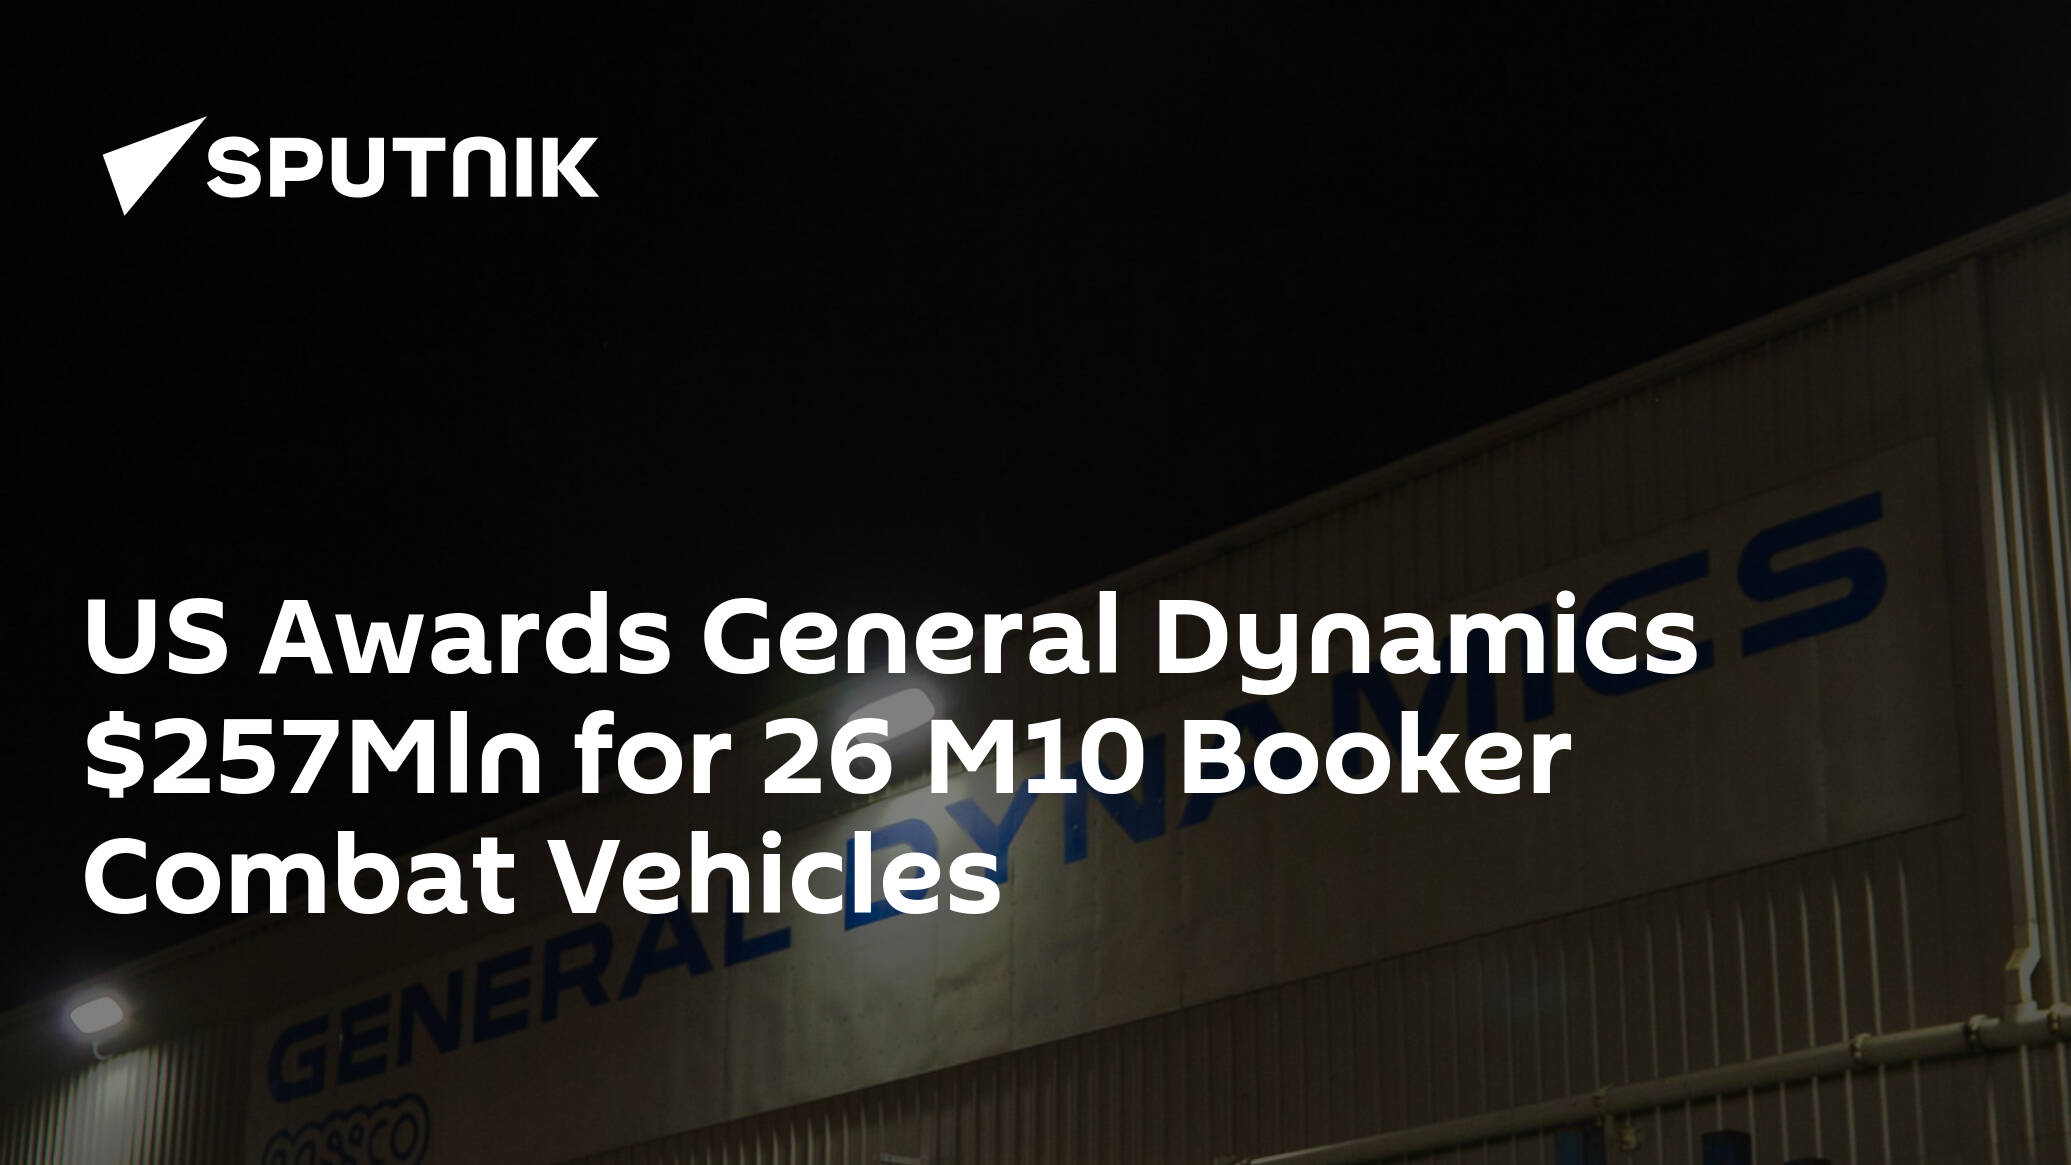 US Awards General Dynamics 7Mln for 26 M10 Booker Combat Vehicles